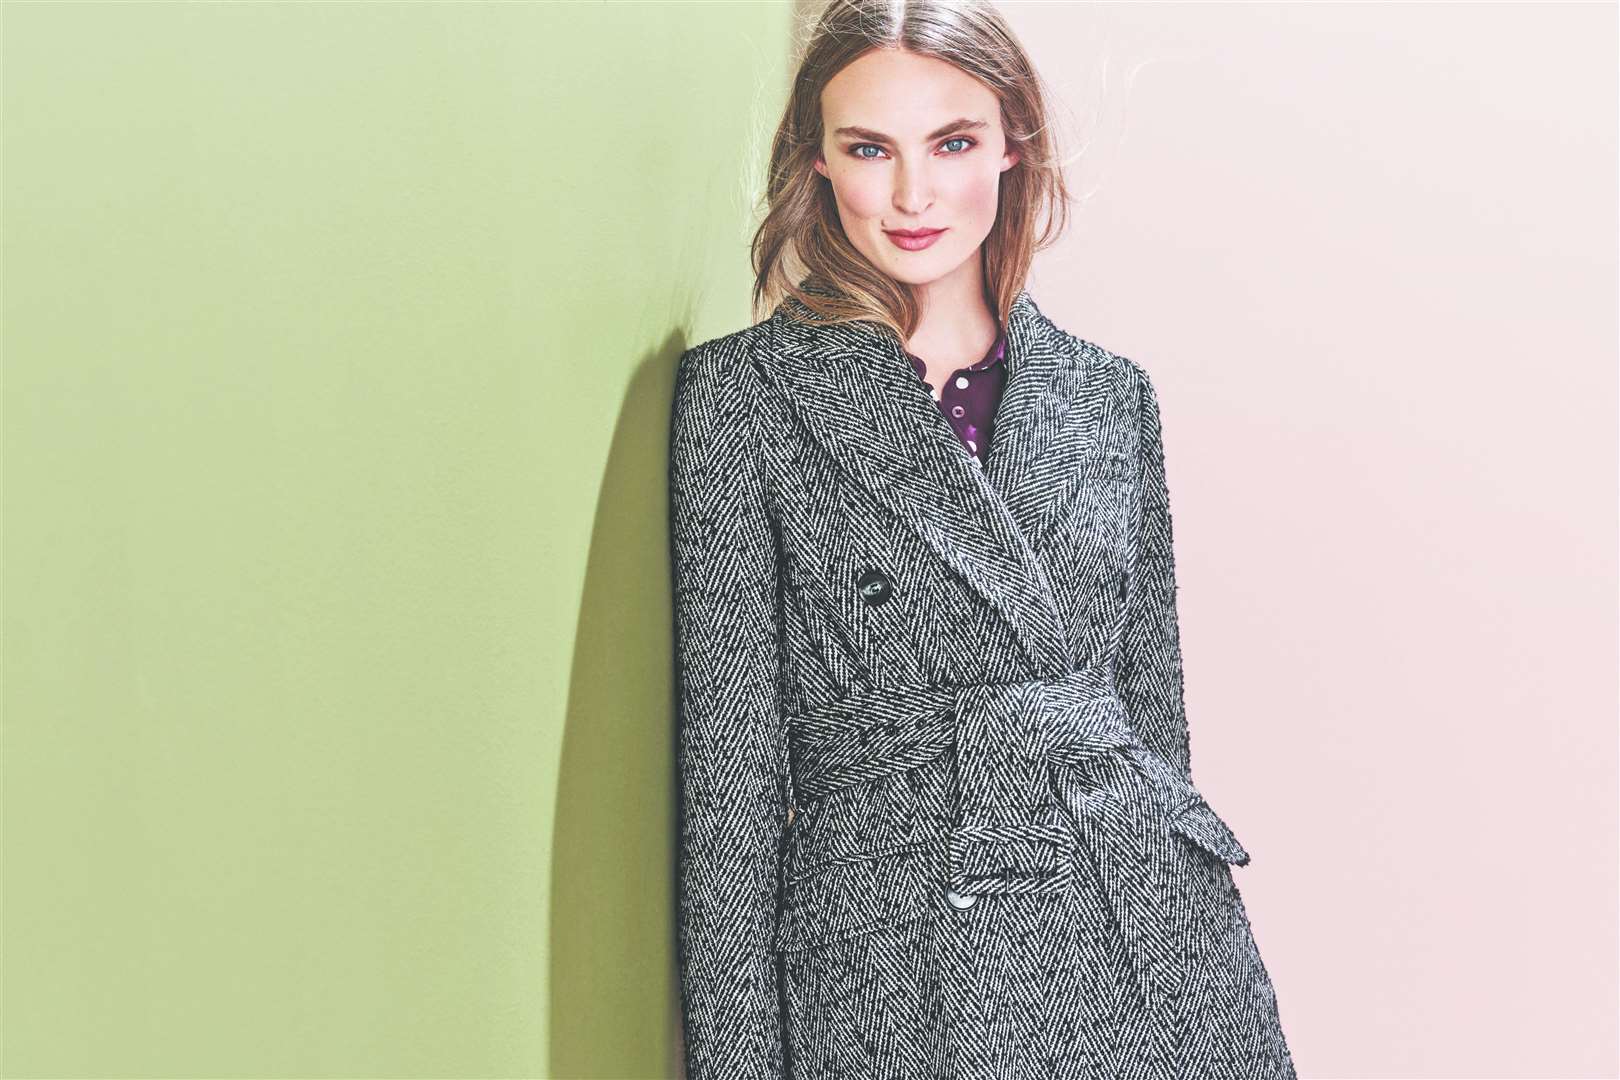 Buy a statement winter coat from M&S.